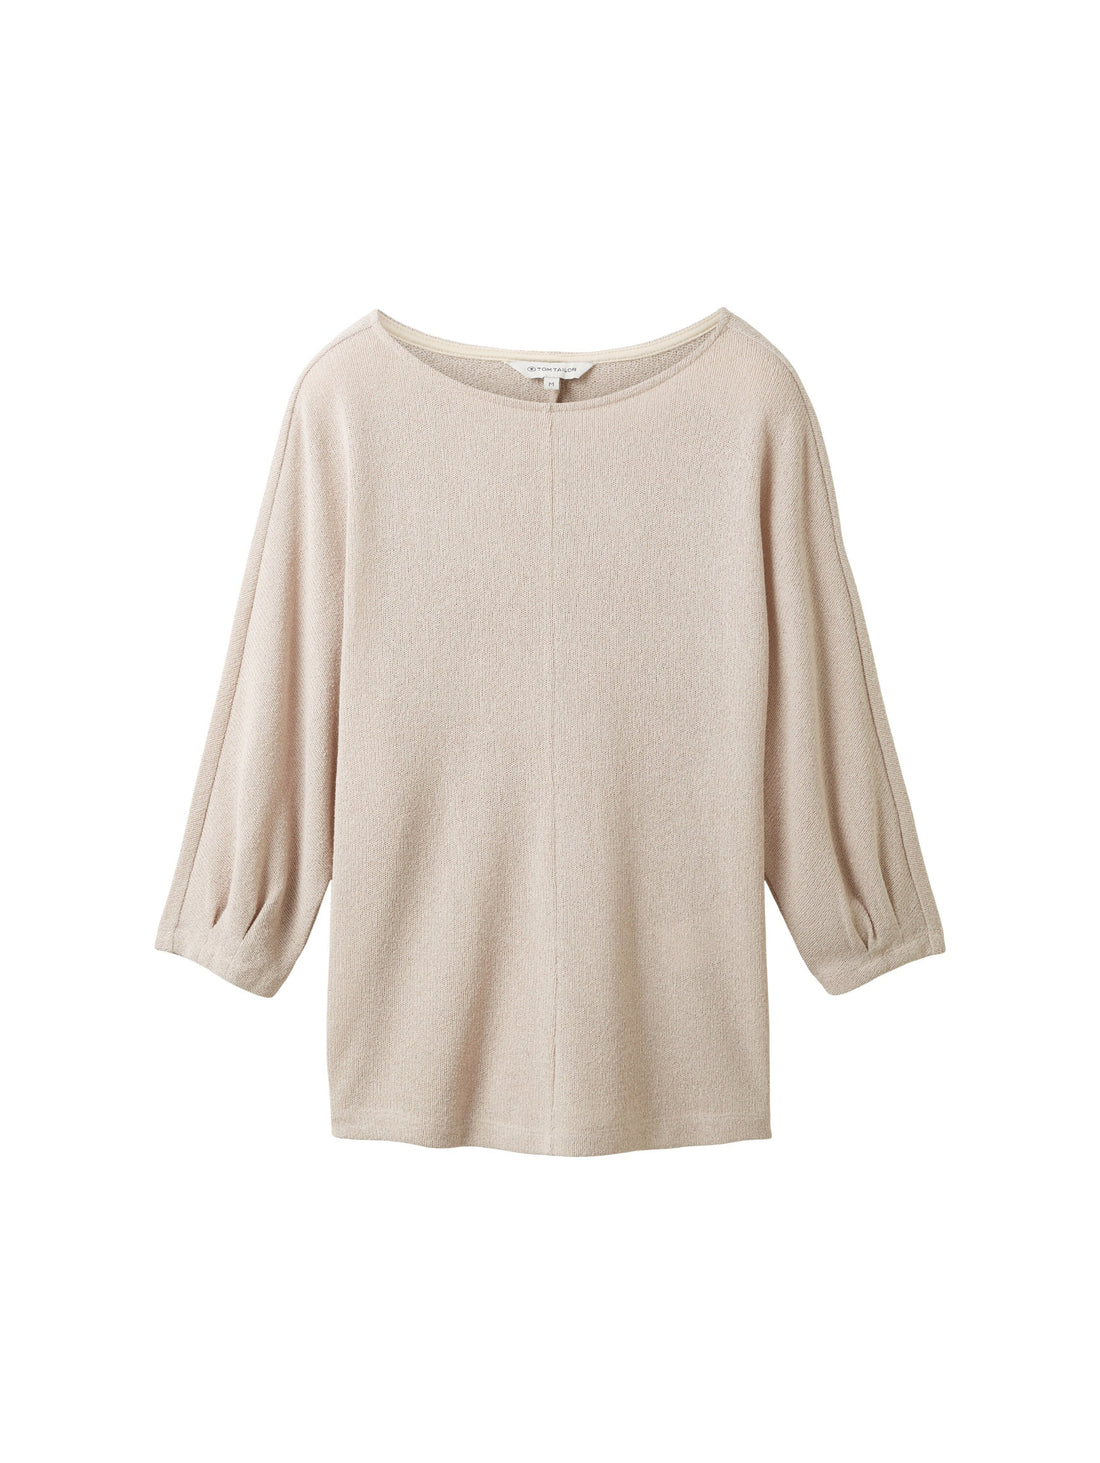 Blouse With 3/4 Sleeve_1038725_16339_01